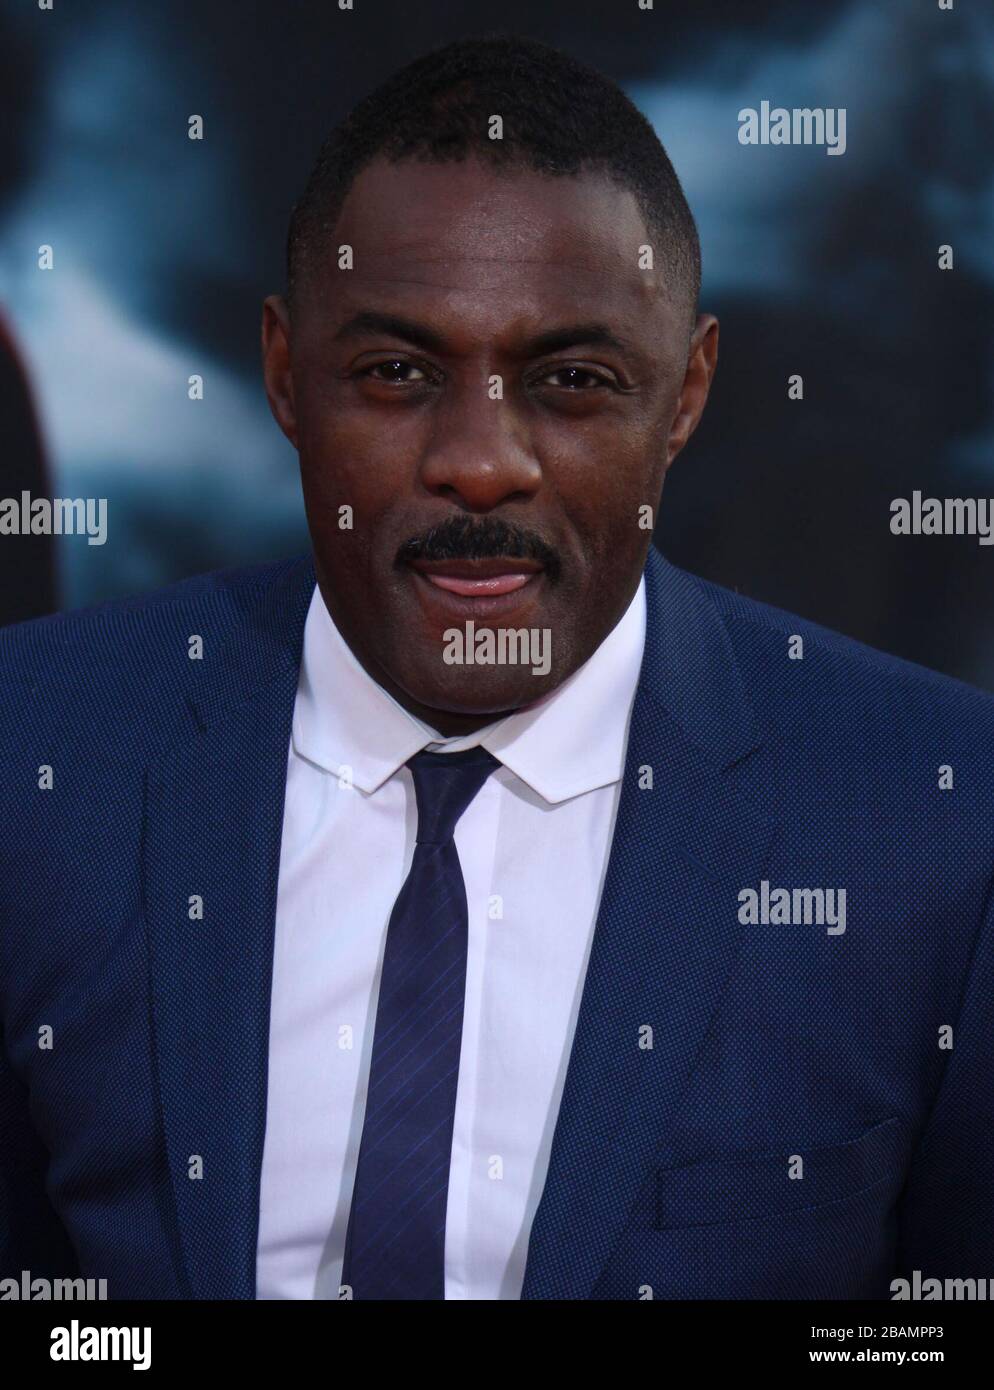 LOS ANGELES, CA - MAY 02: Idris Elba attends the Premiere of Paramount Pictures' and Marvel's 'Thor' at the El Capitan Theater on May 2, 2011 in Los Angeles, California. People: Idris Elba Credit: Storms Media Group/Alamy Live News Stock Photo